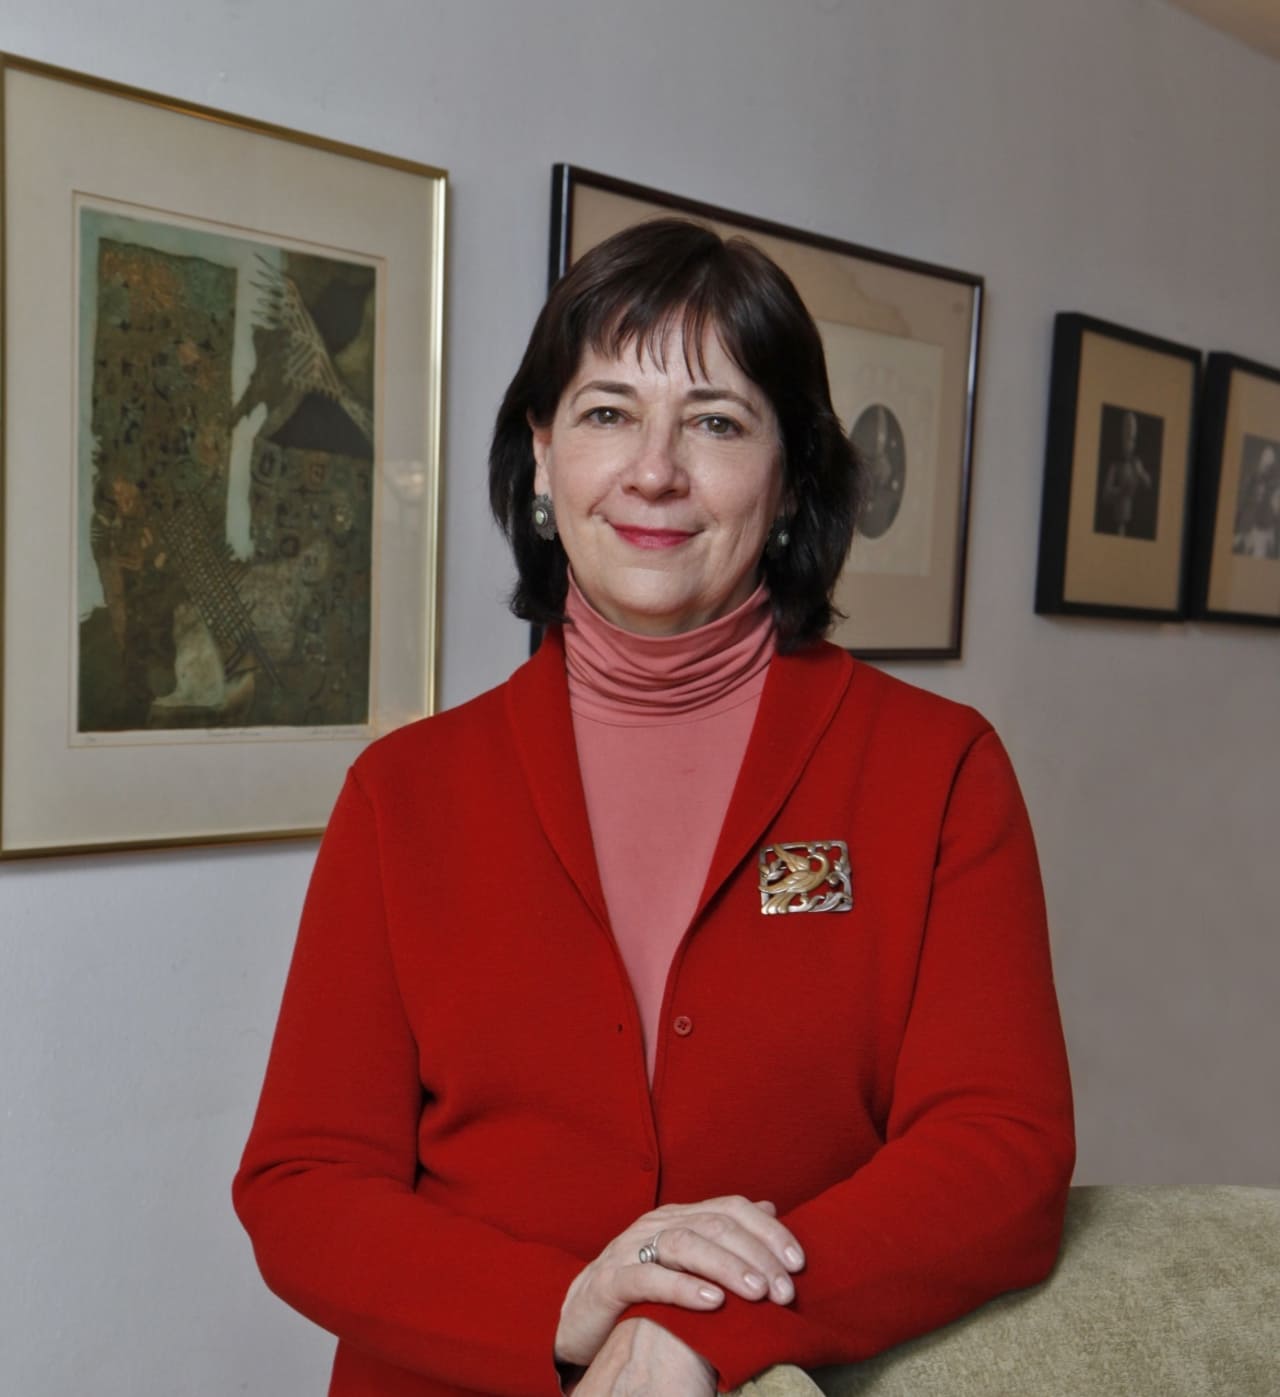 Leslee Asch will retire from her role as executive director of the Silvermine Arts Center in April.